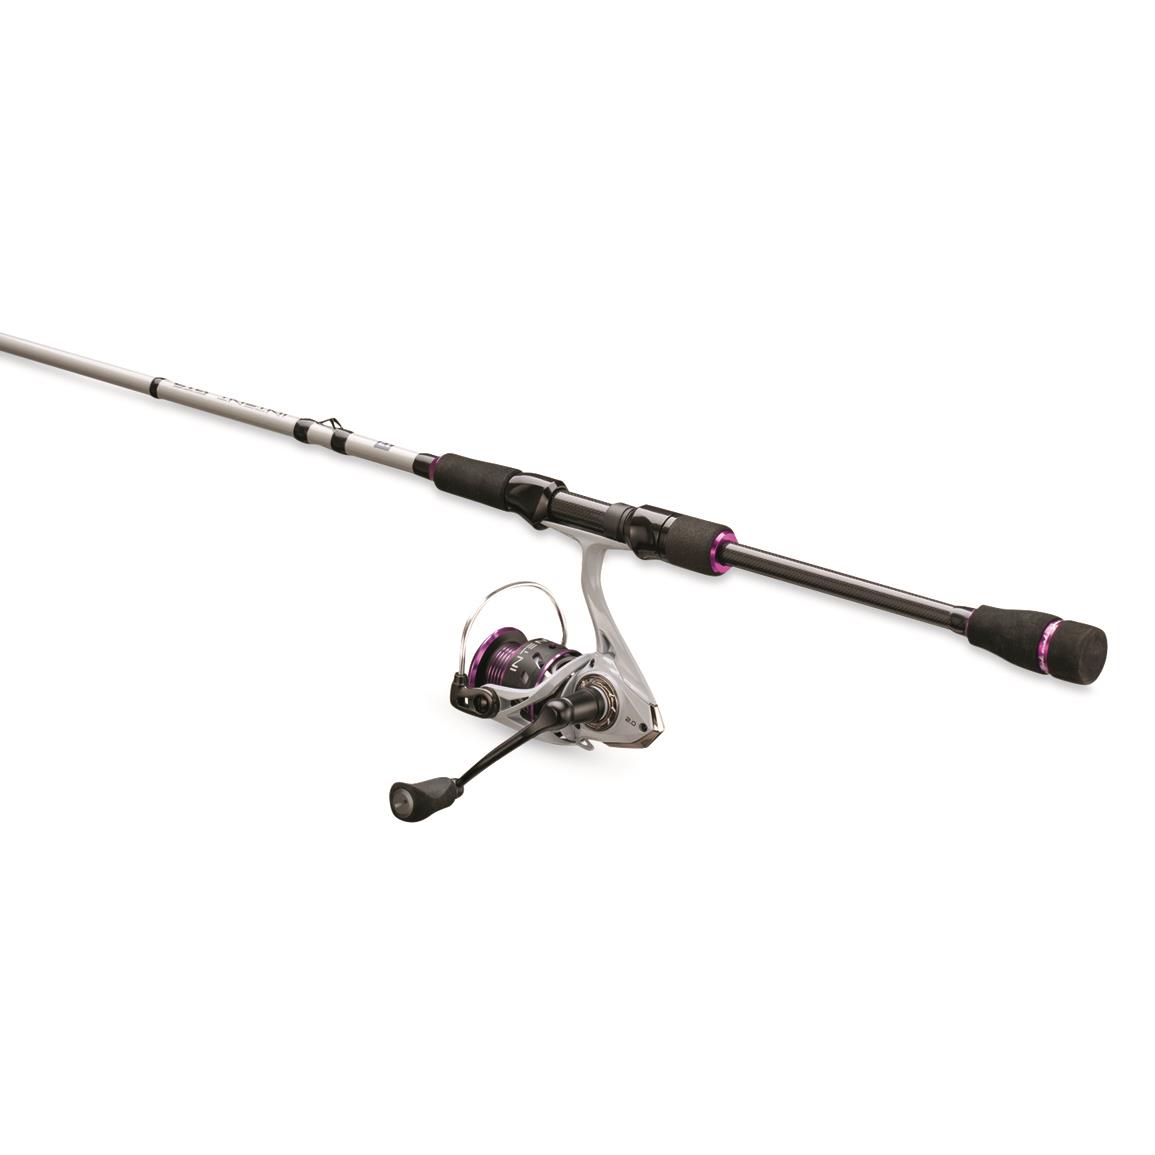 St. Croix X-Trek Spinning Rod & Reel Fishing Combo - 731204, Spinning  Combos at Sportsman's Guide